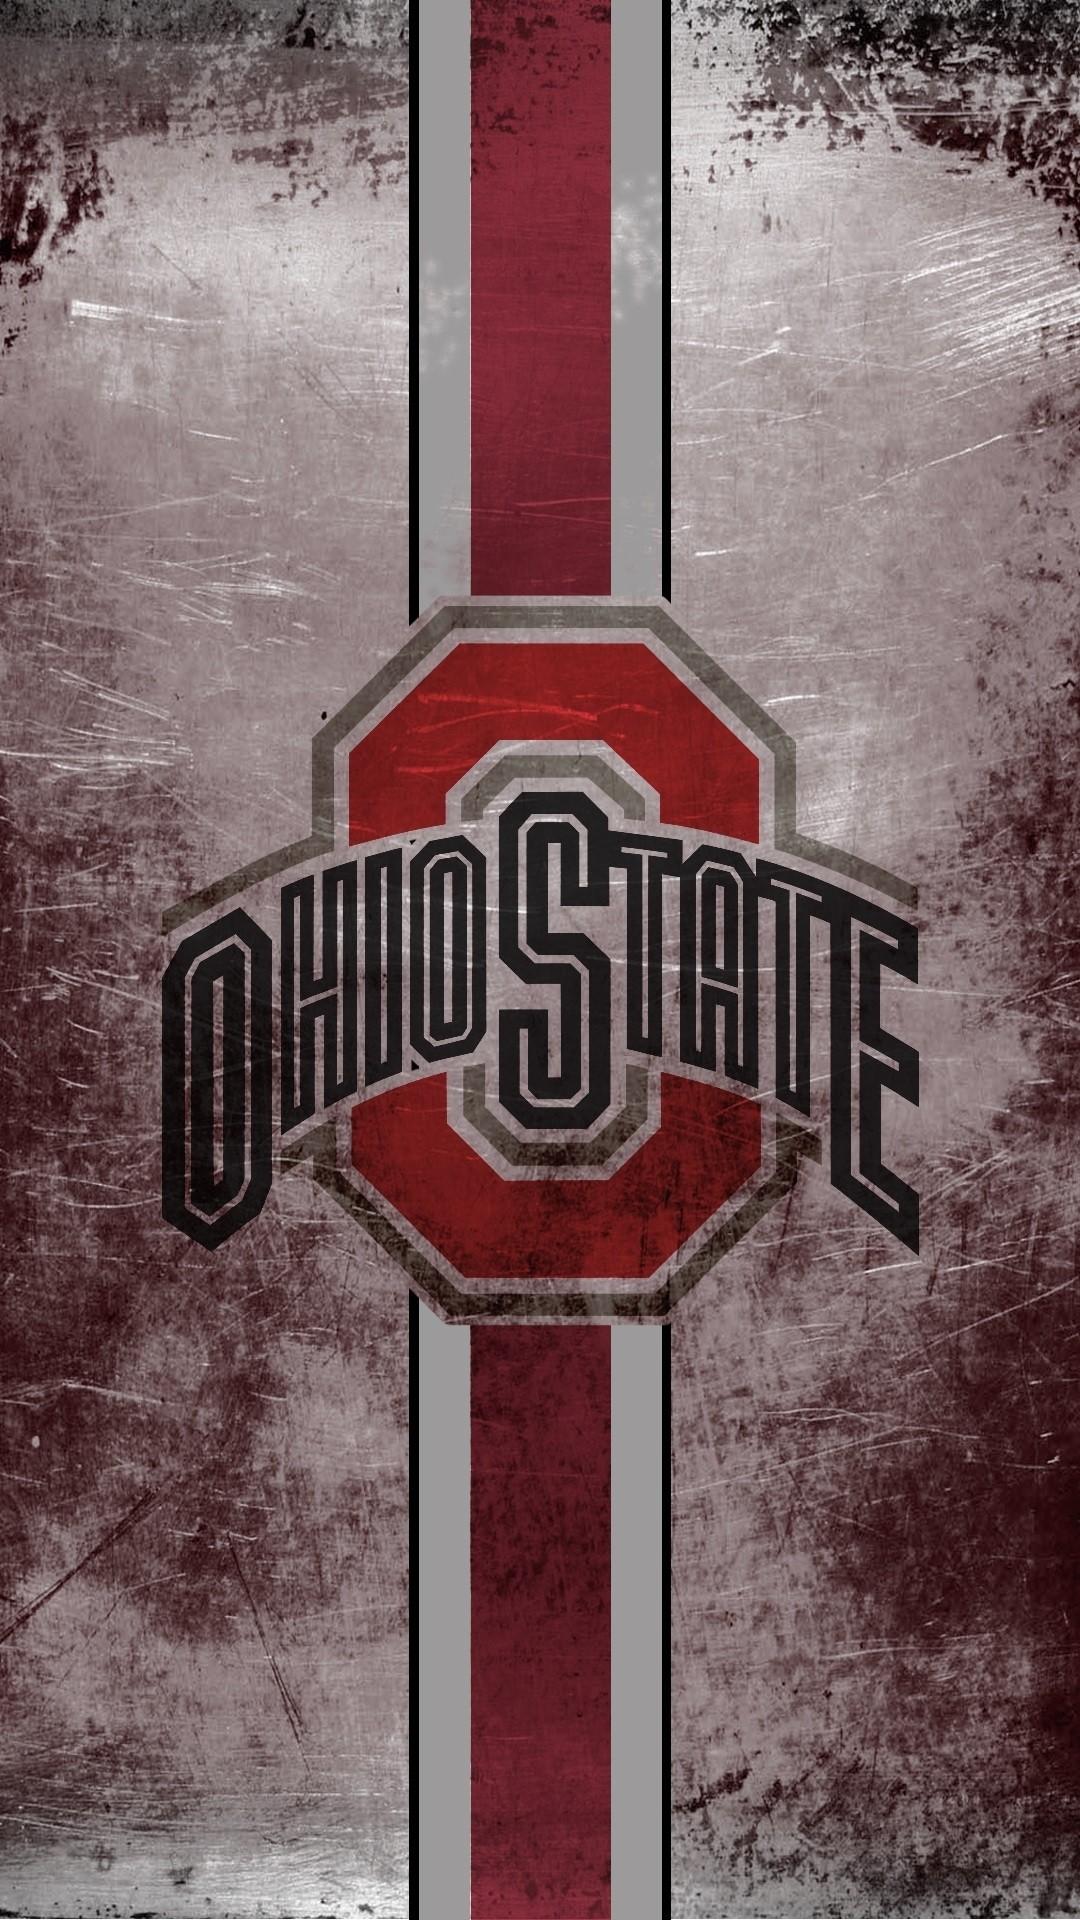 Ohio State Iphone Wallpapers